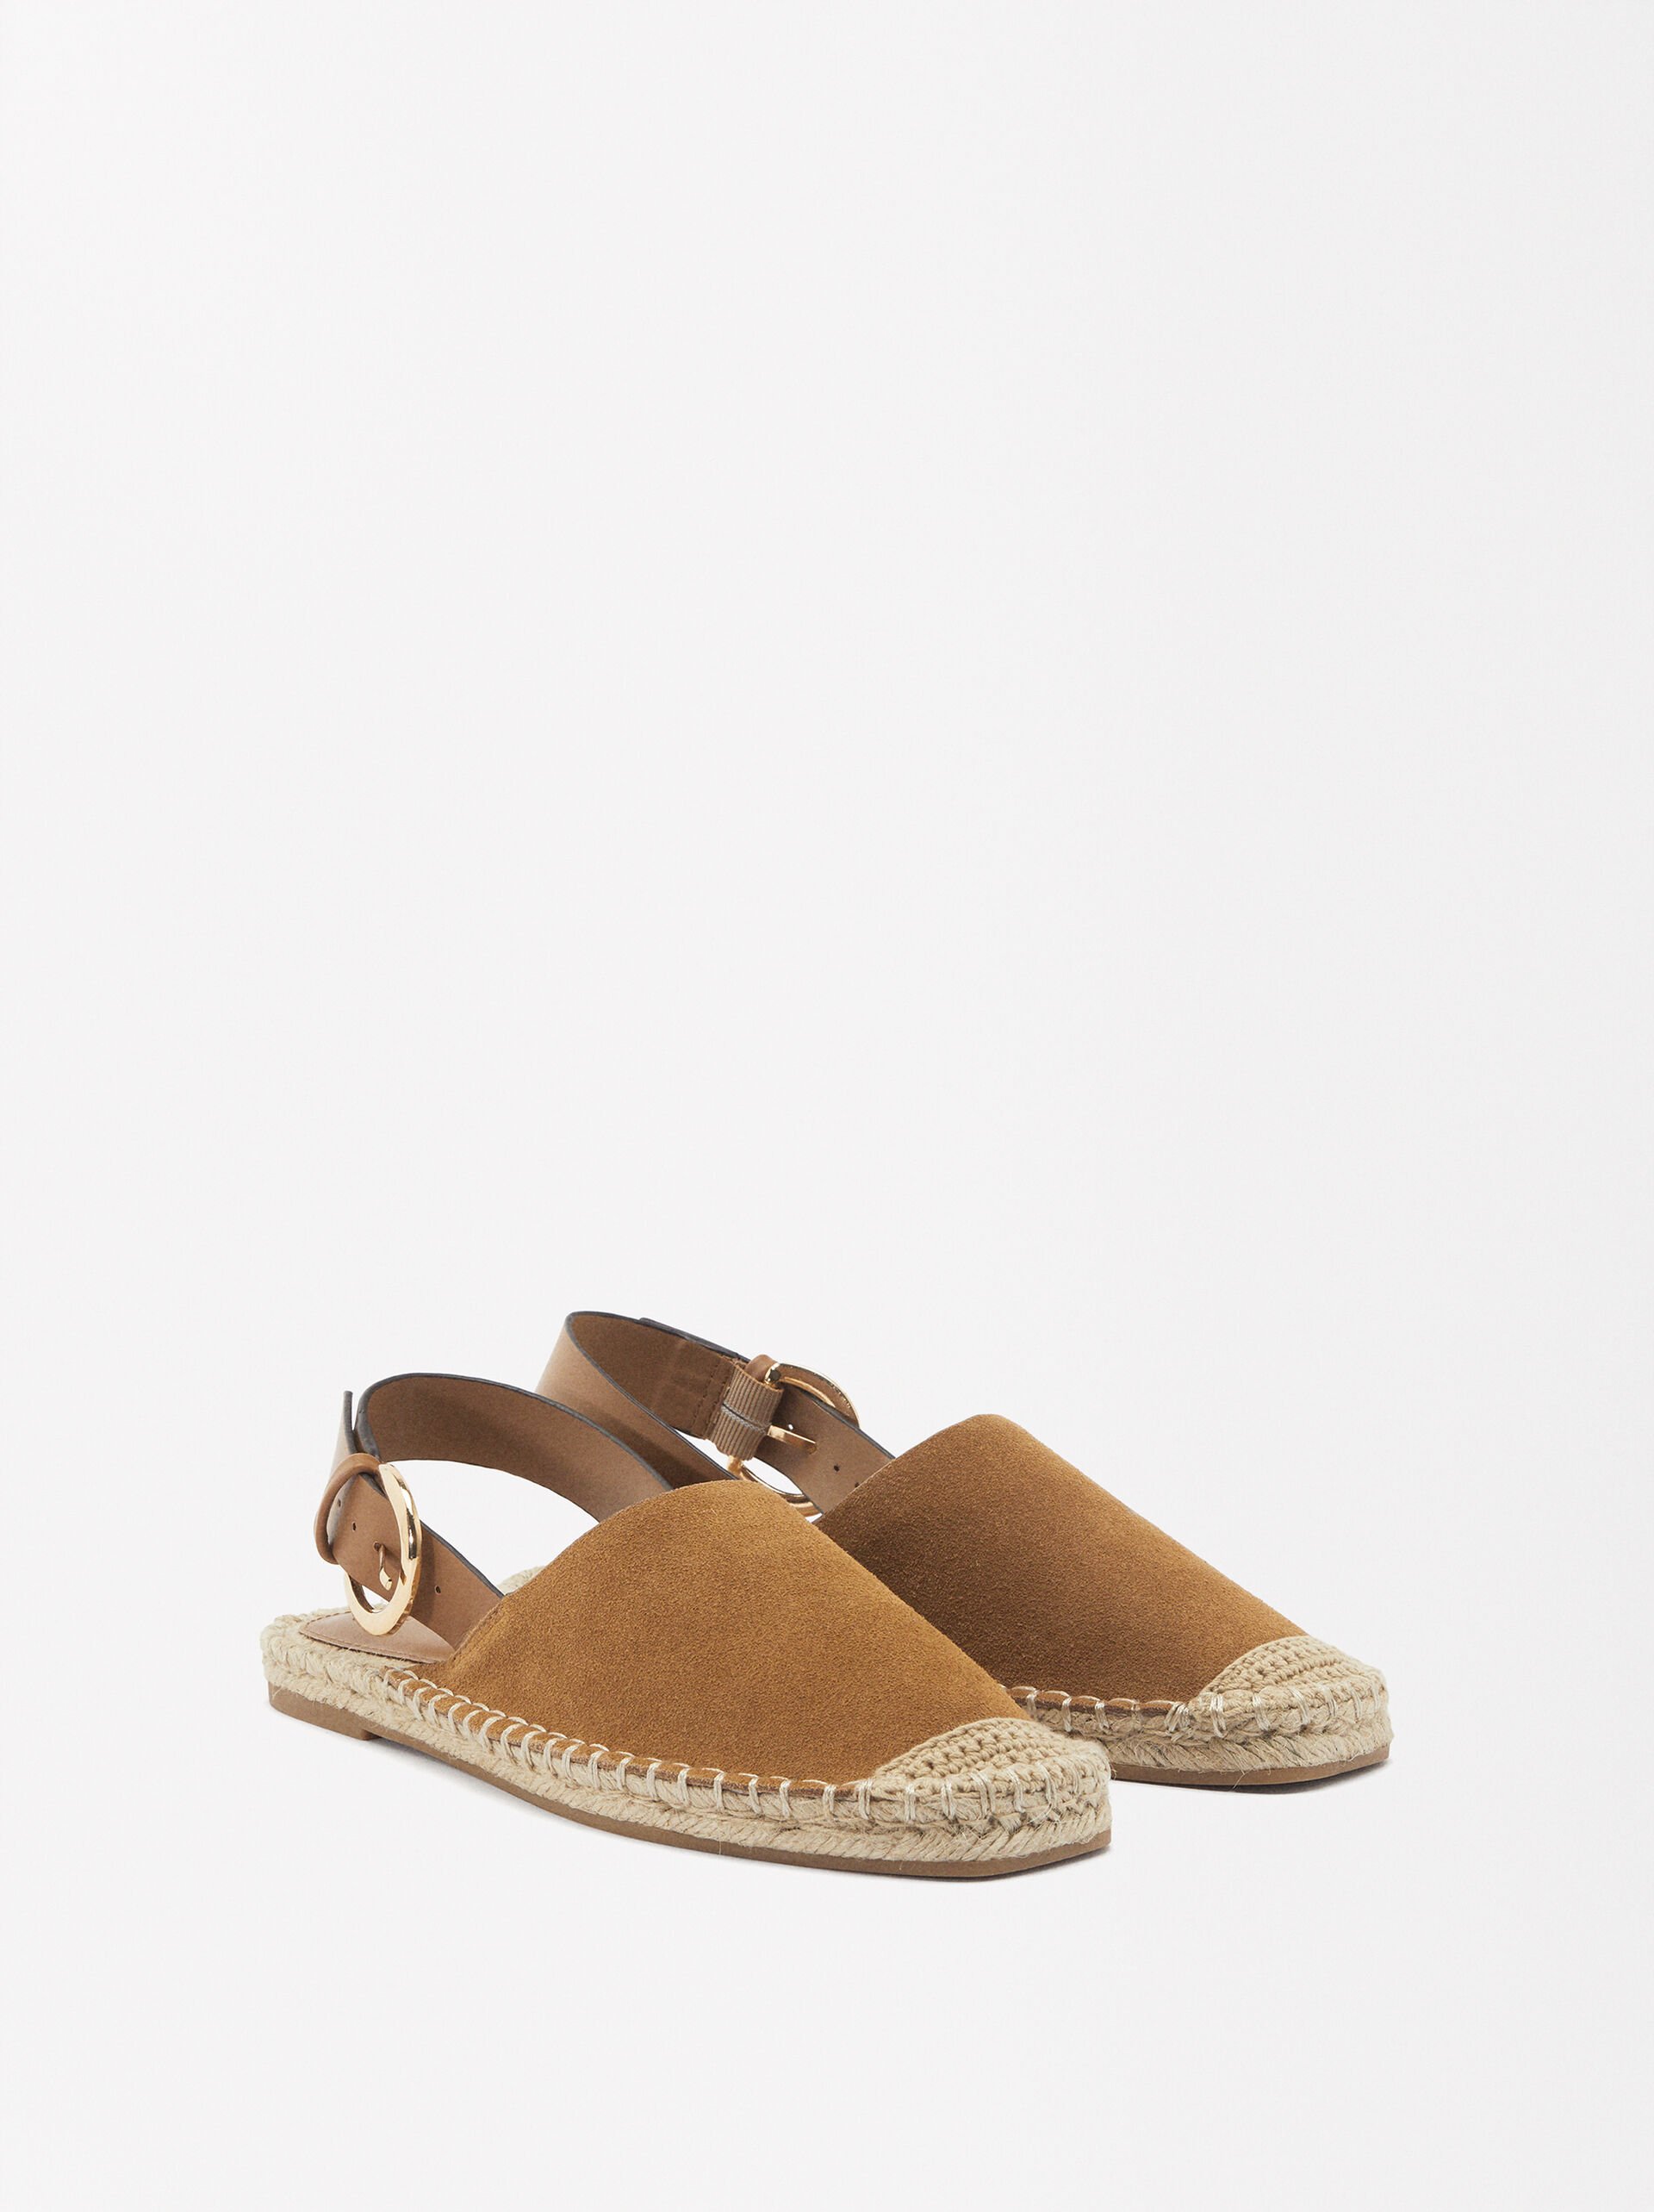 Leather And Jute Espadrilles image number 2.0